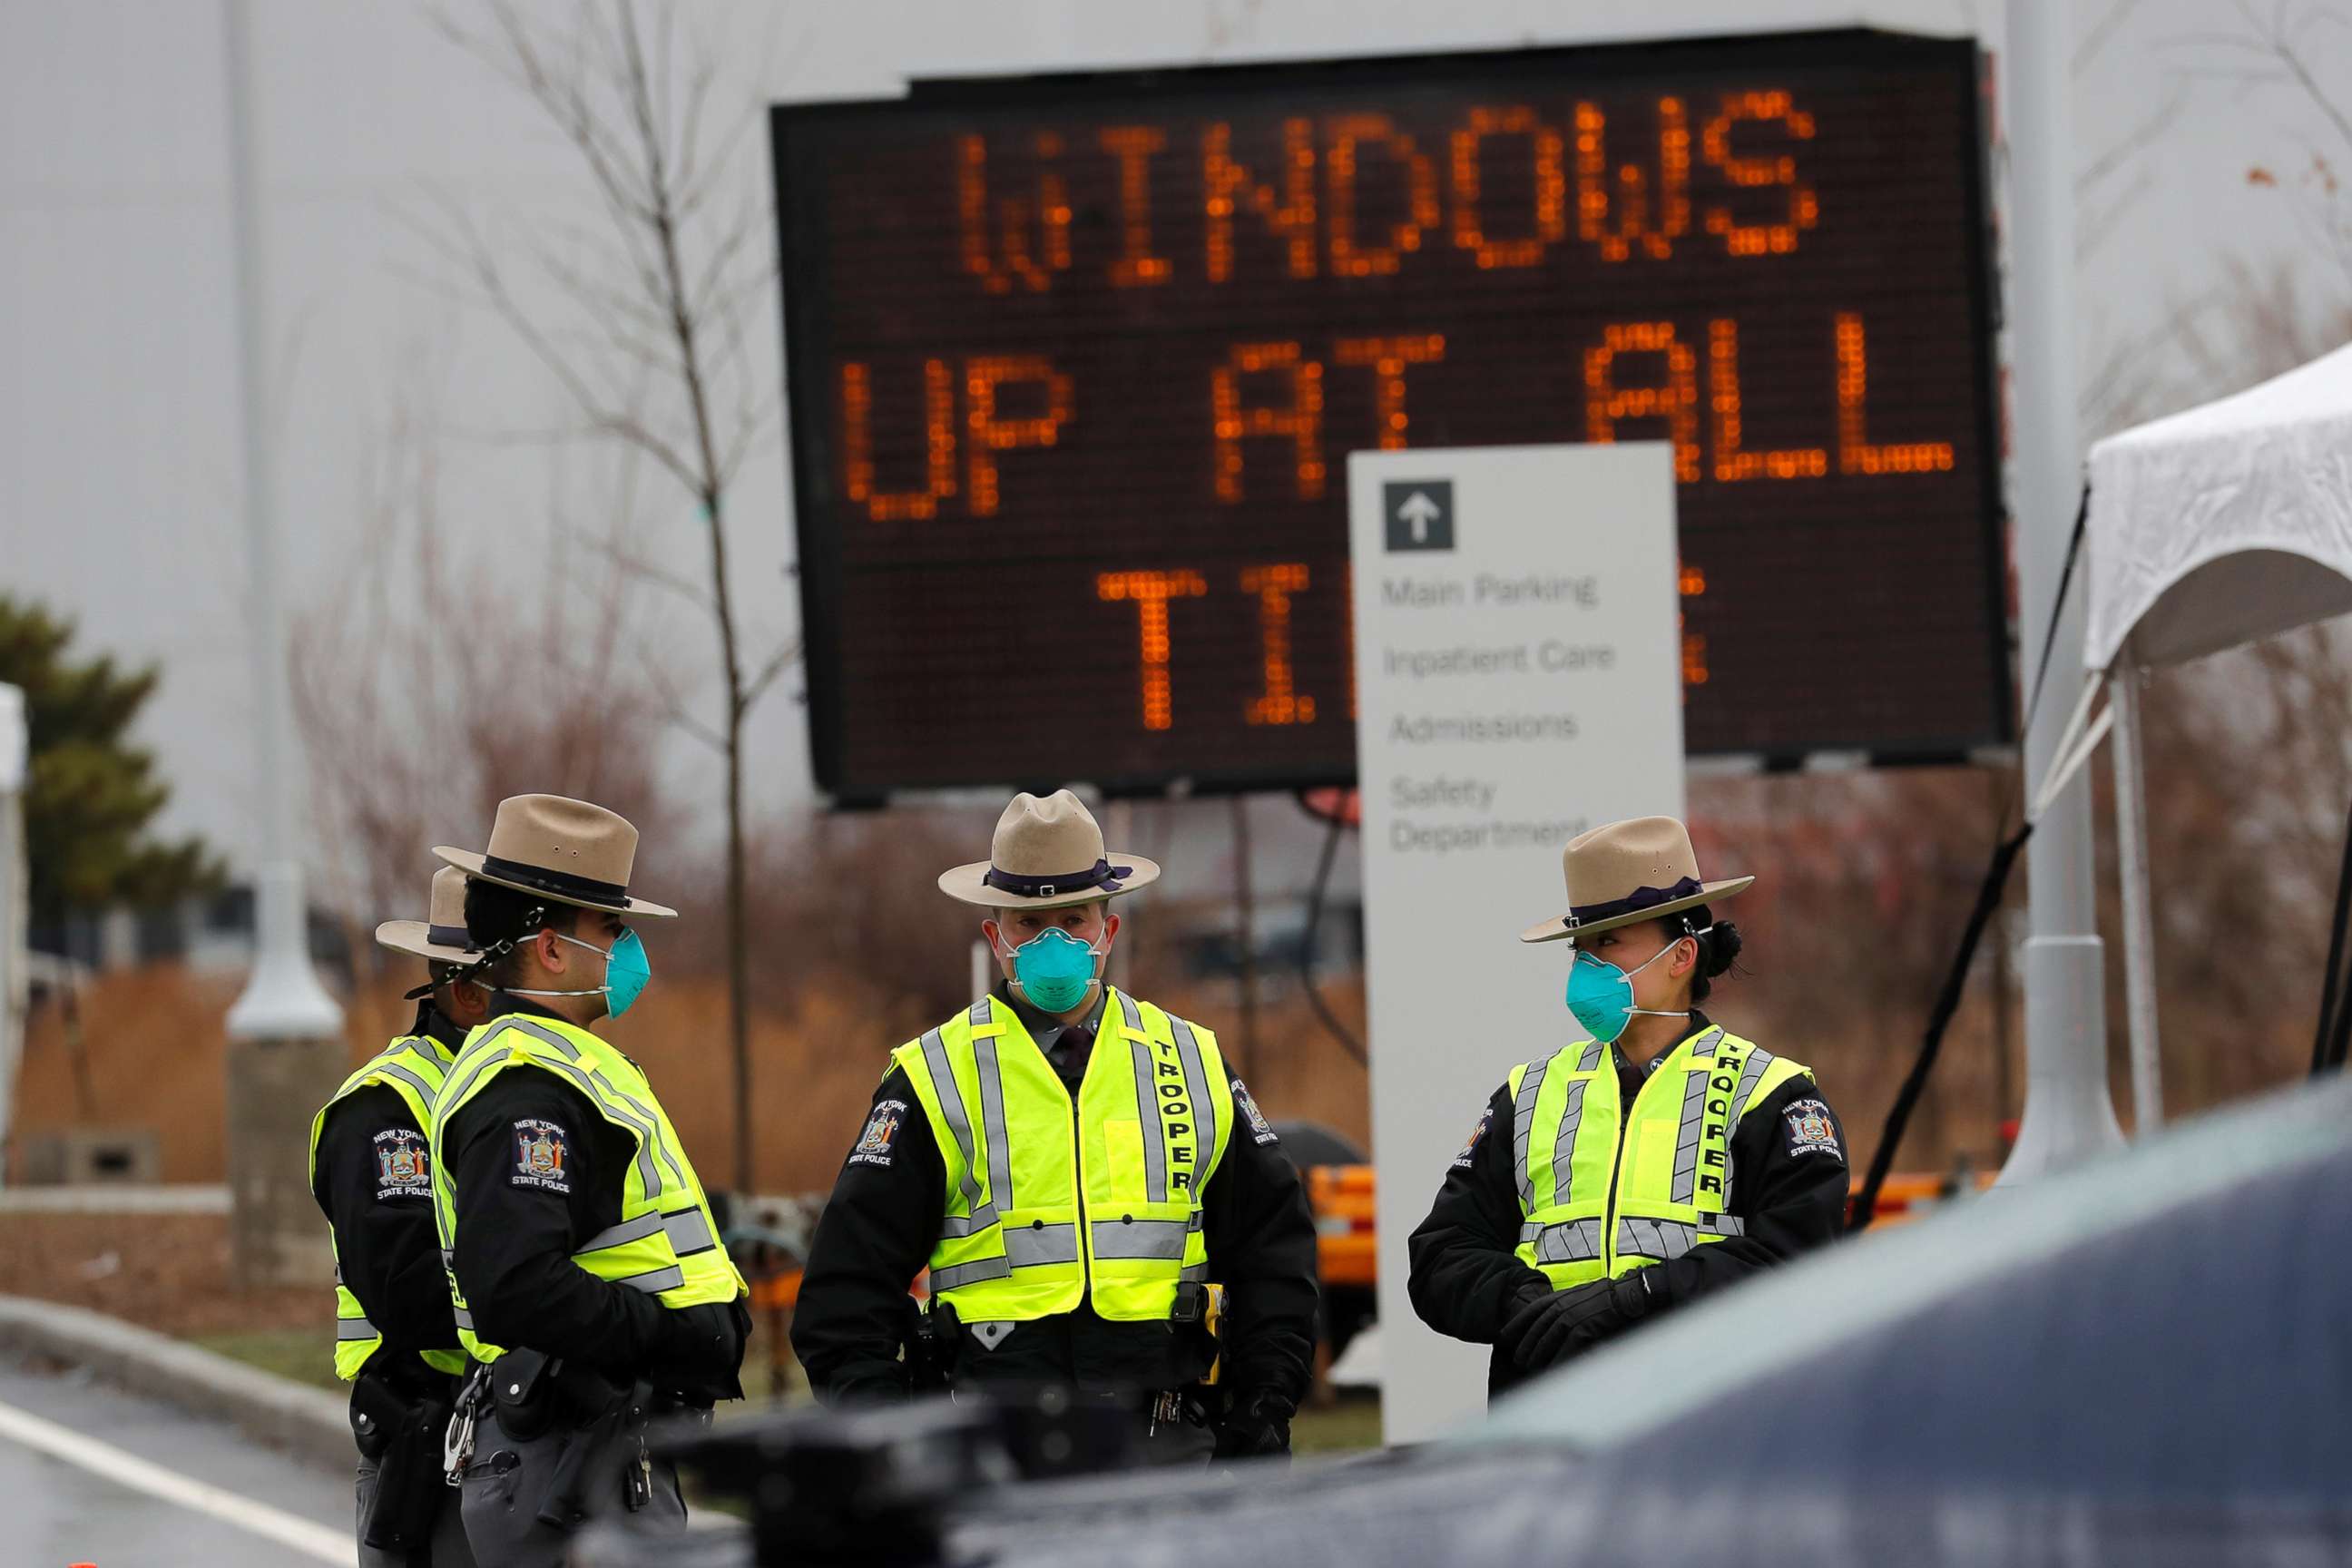 PHOTO: New York State Police officers stand outside a new coronavirus testing center in the Staten Island borough of New York City, March 19, 2020.